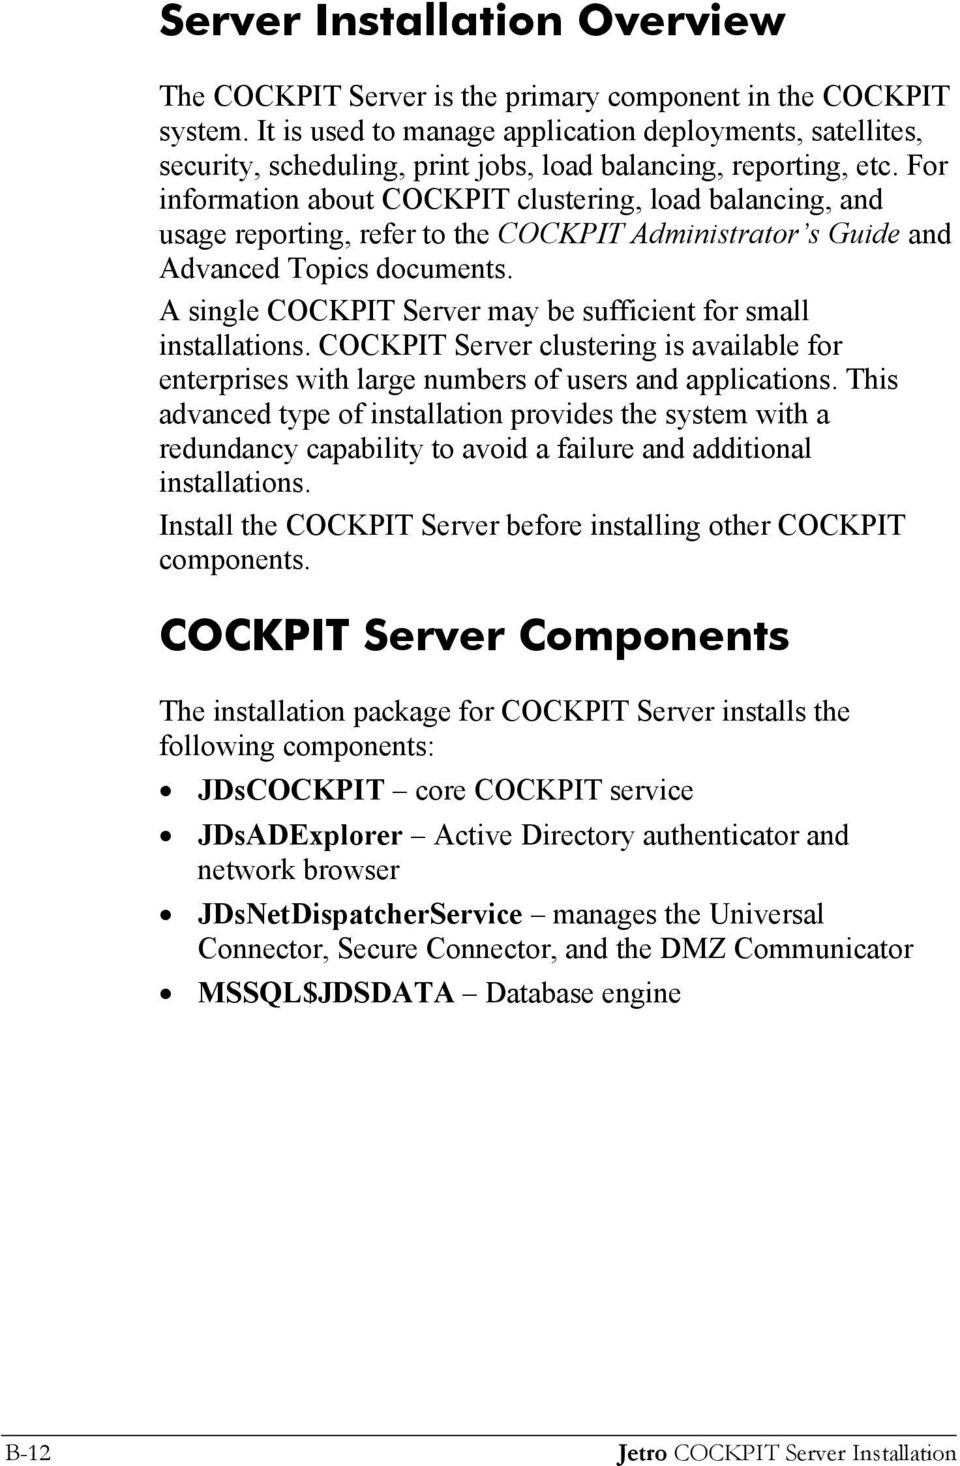 For information about COCKPIT clustering, load balancing, and usage reporting, refer to the COCKPIT Administrator s Guide and Advanced Topics documents.